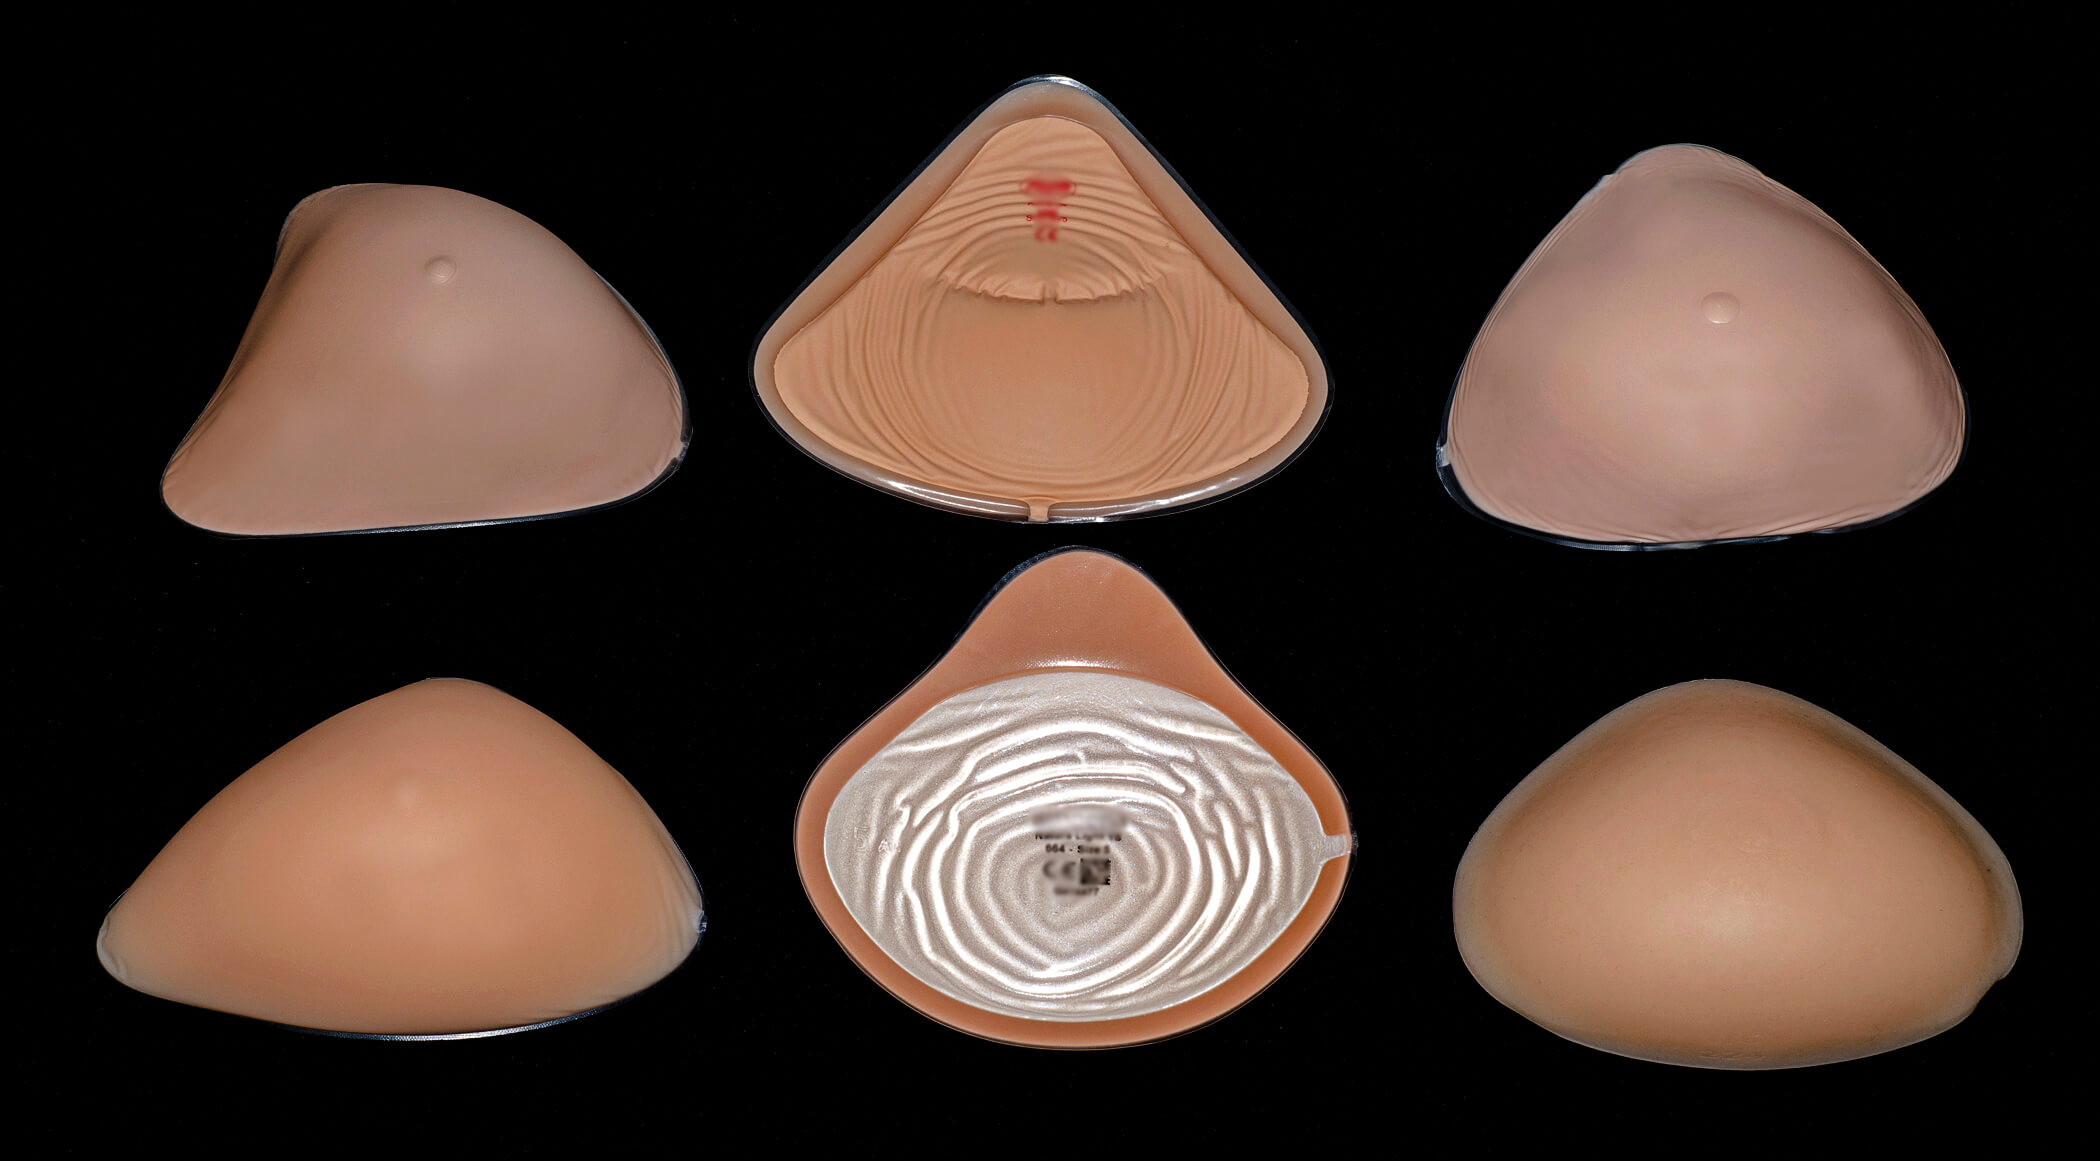 Conical Breasts -  UK